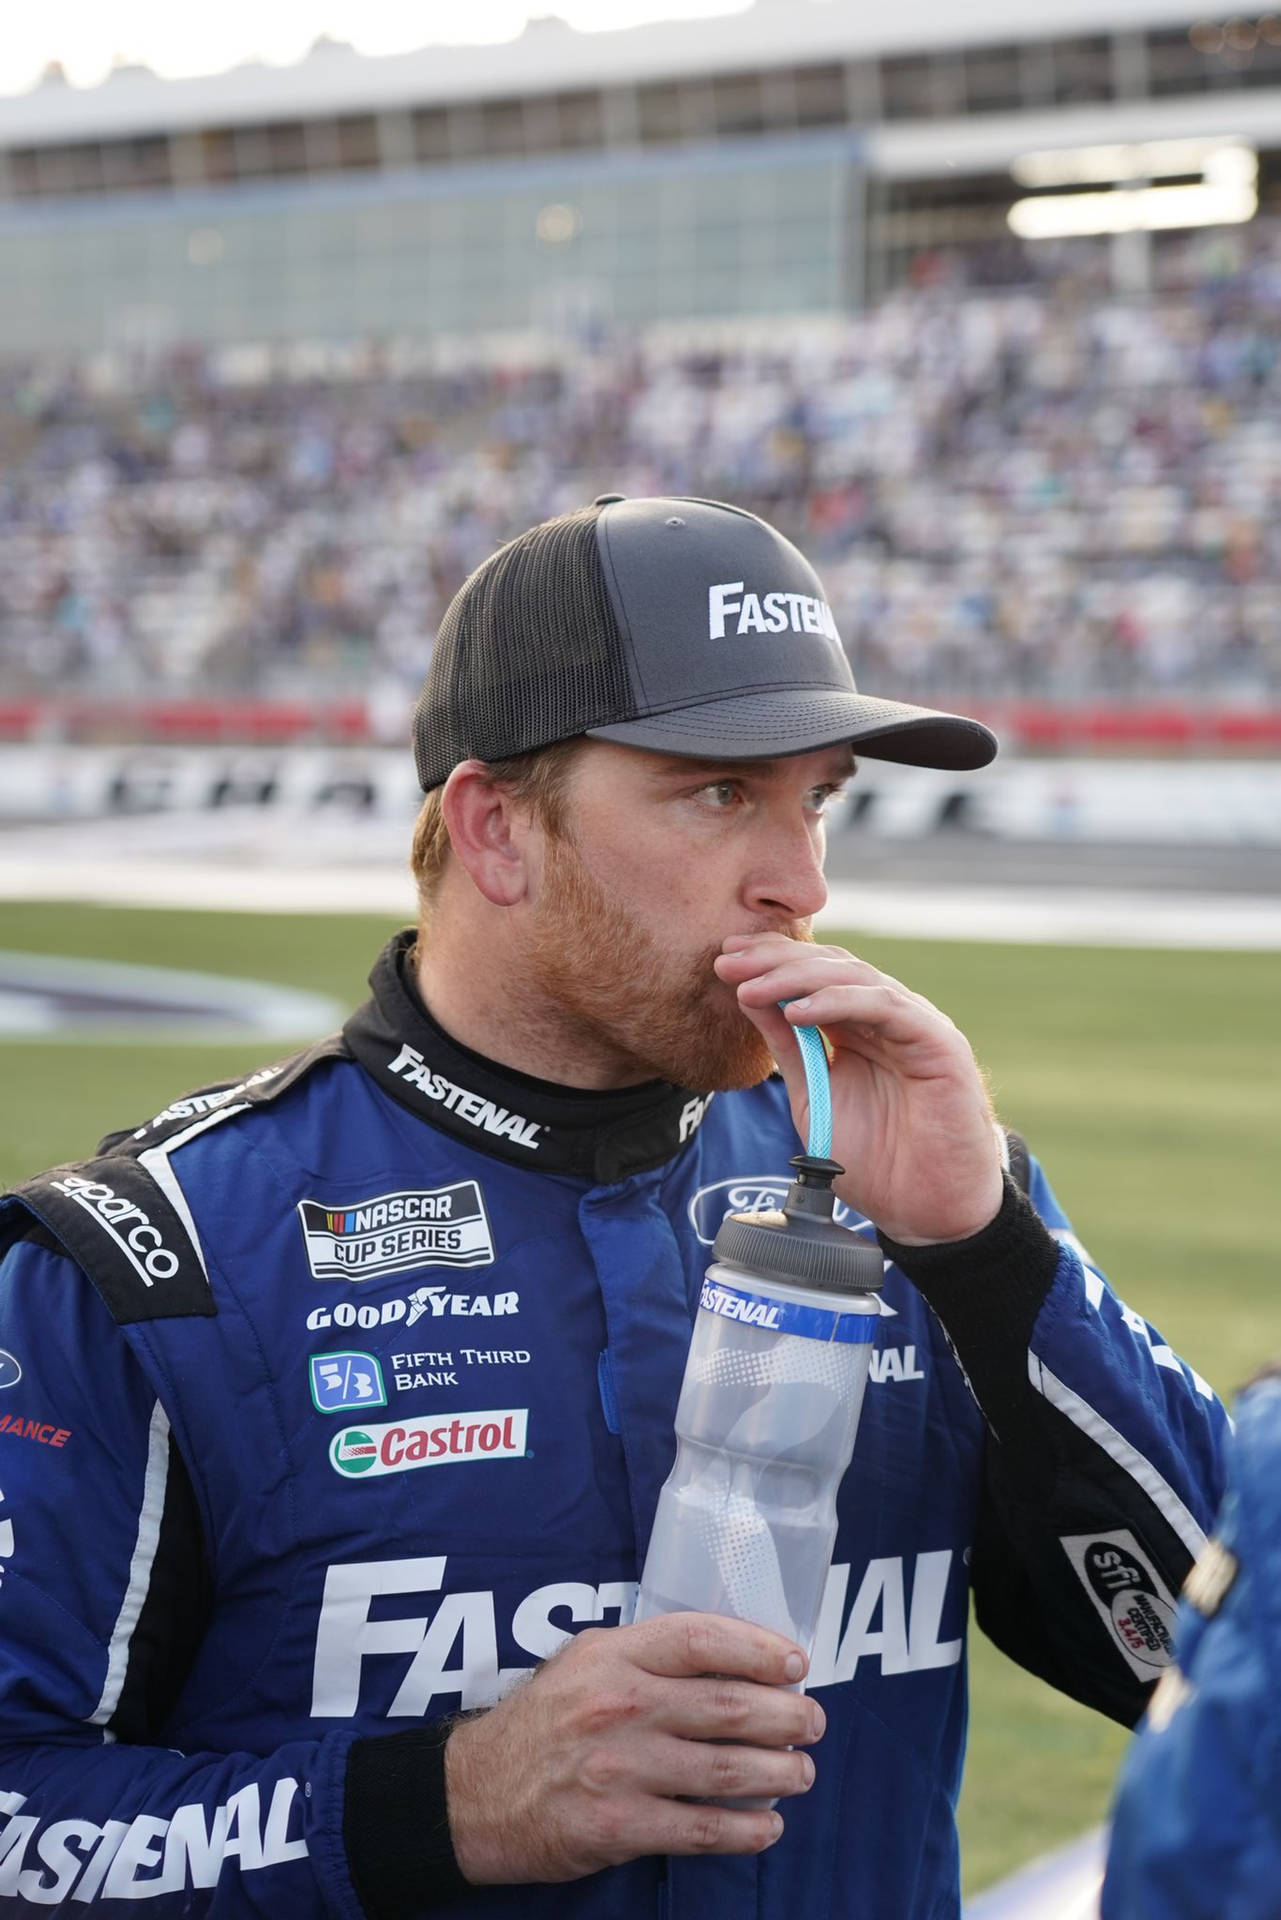 Chrisbuescher Dricker Vatten - (this Sentence Doesn't Have Much Context Regarding Computer Or Mobile Wallpaper. If You Could Provide More Context, I Could Help You Better.) Wallpaper